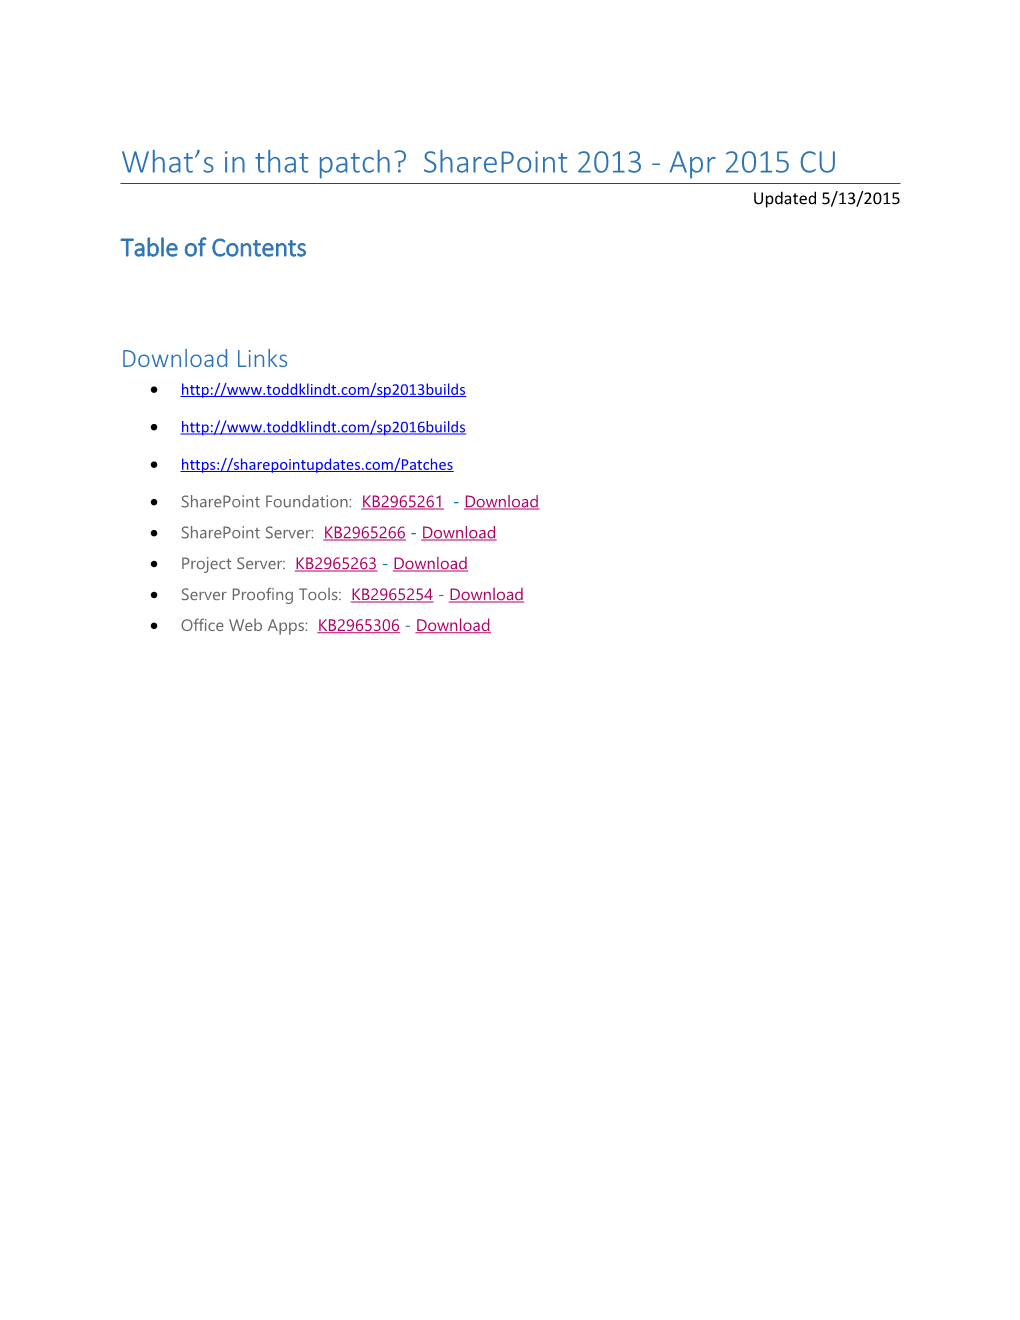 What S in That Patch? Sharepoint 2013 - Apr 2015 CU